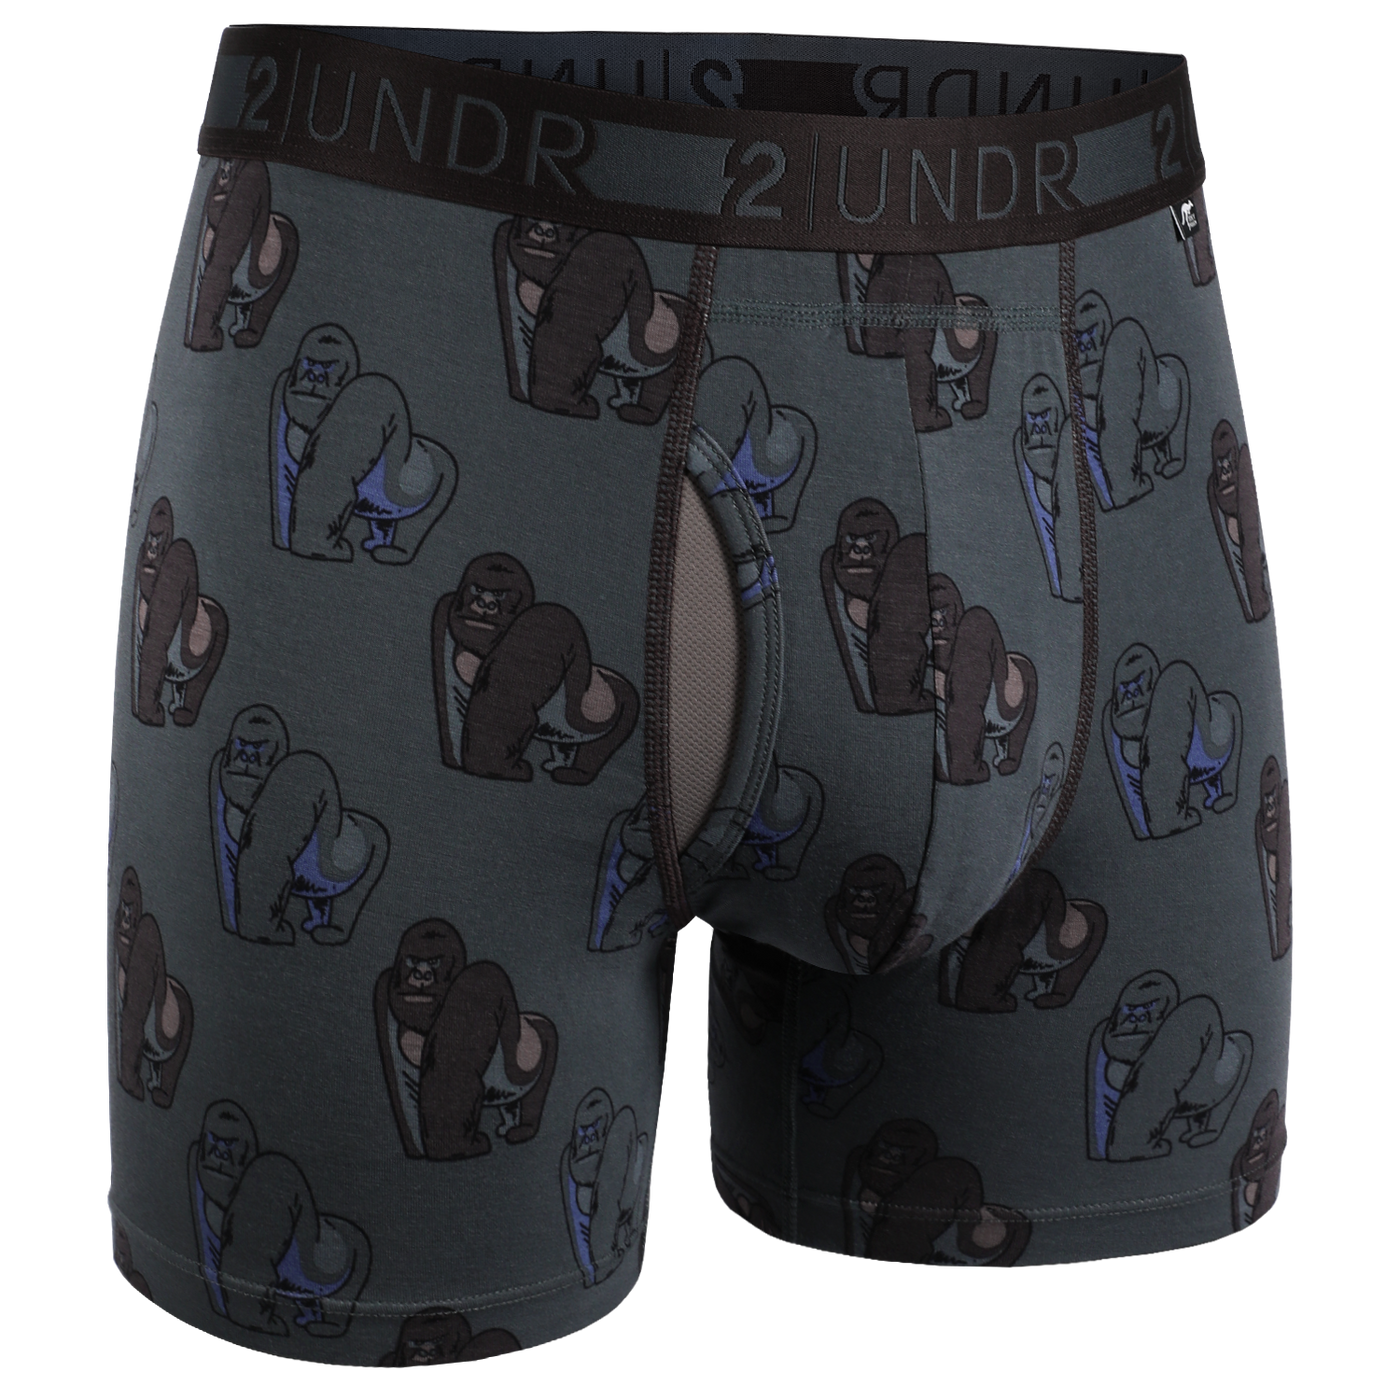 Day Shift Boxer Brief Printed 4 Pack - Animals